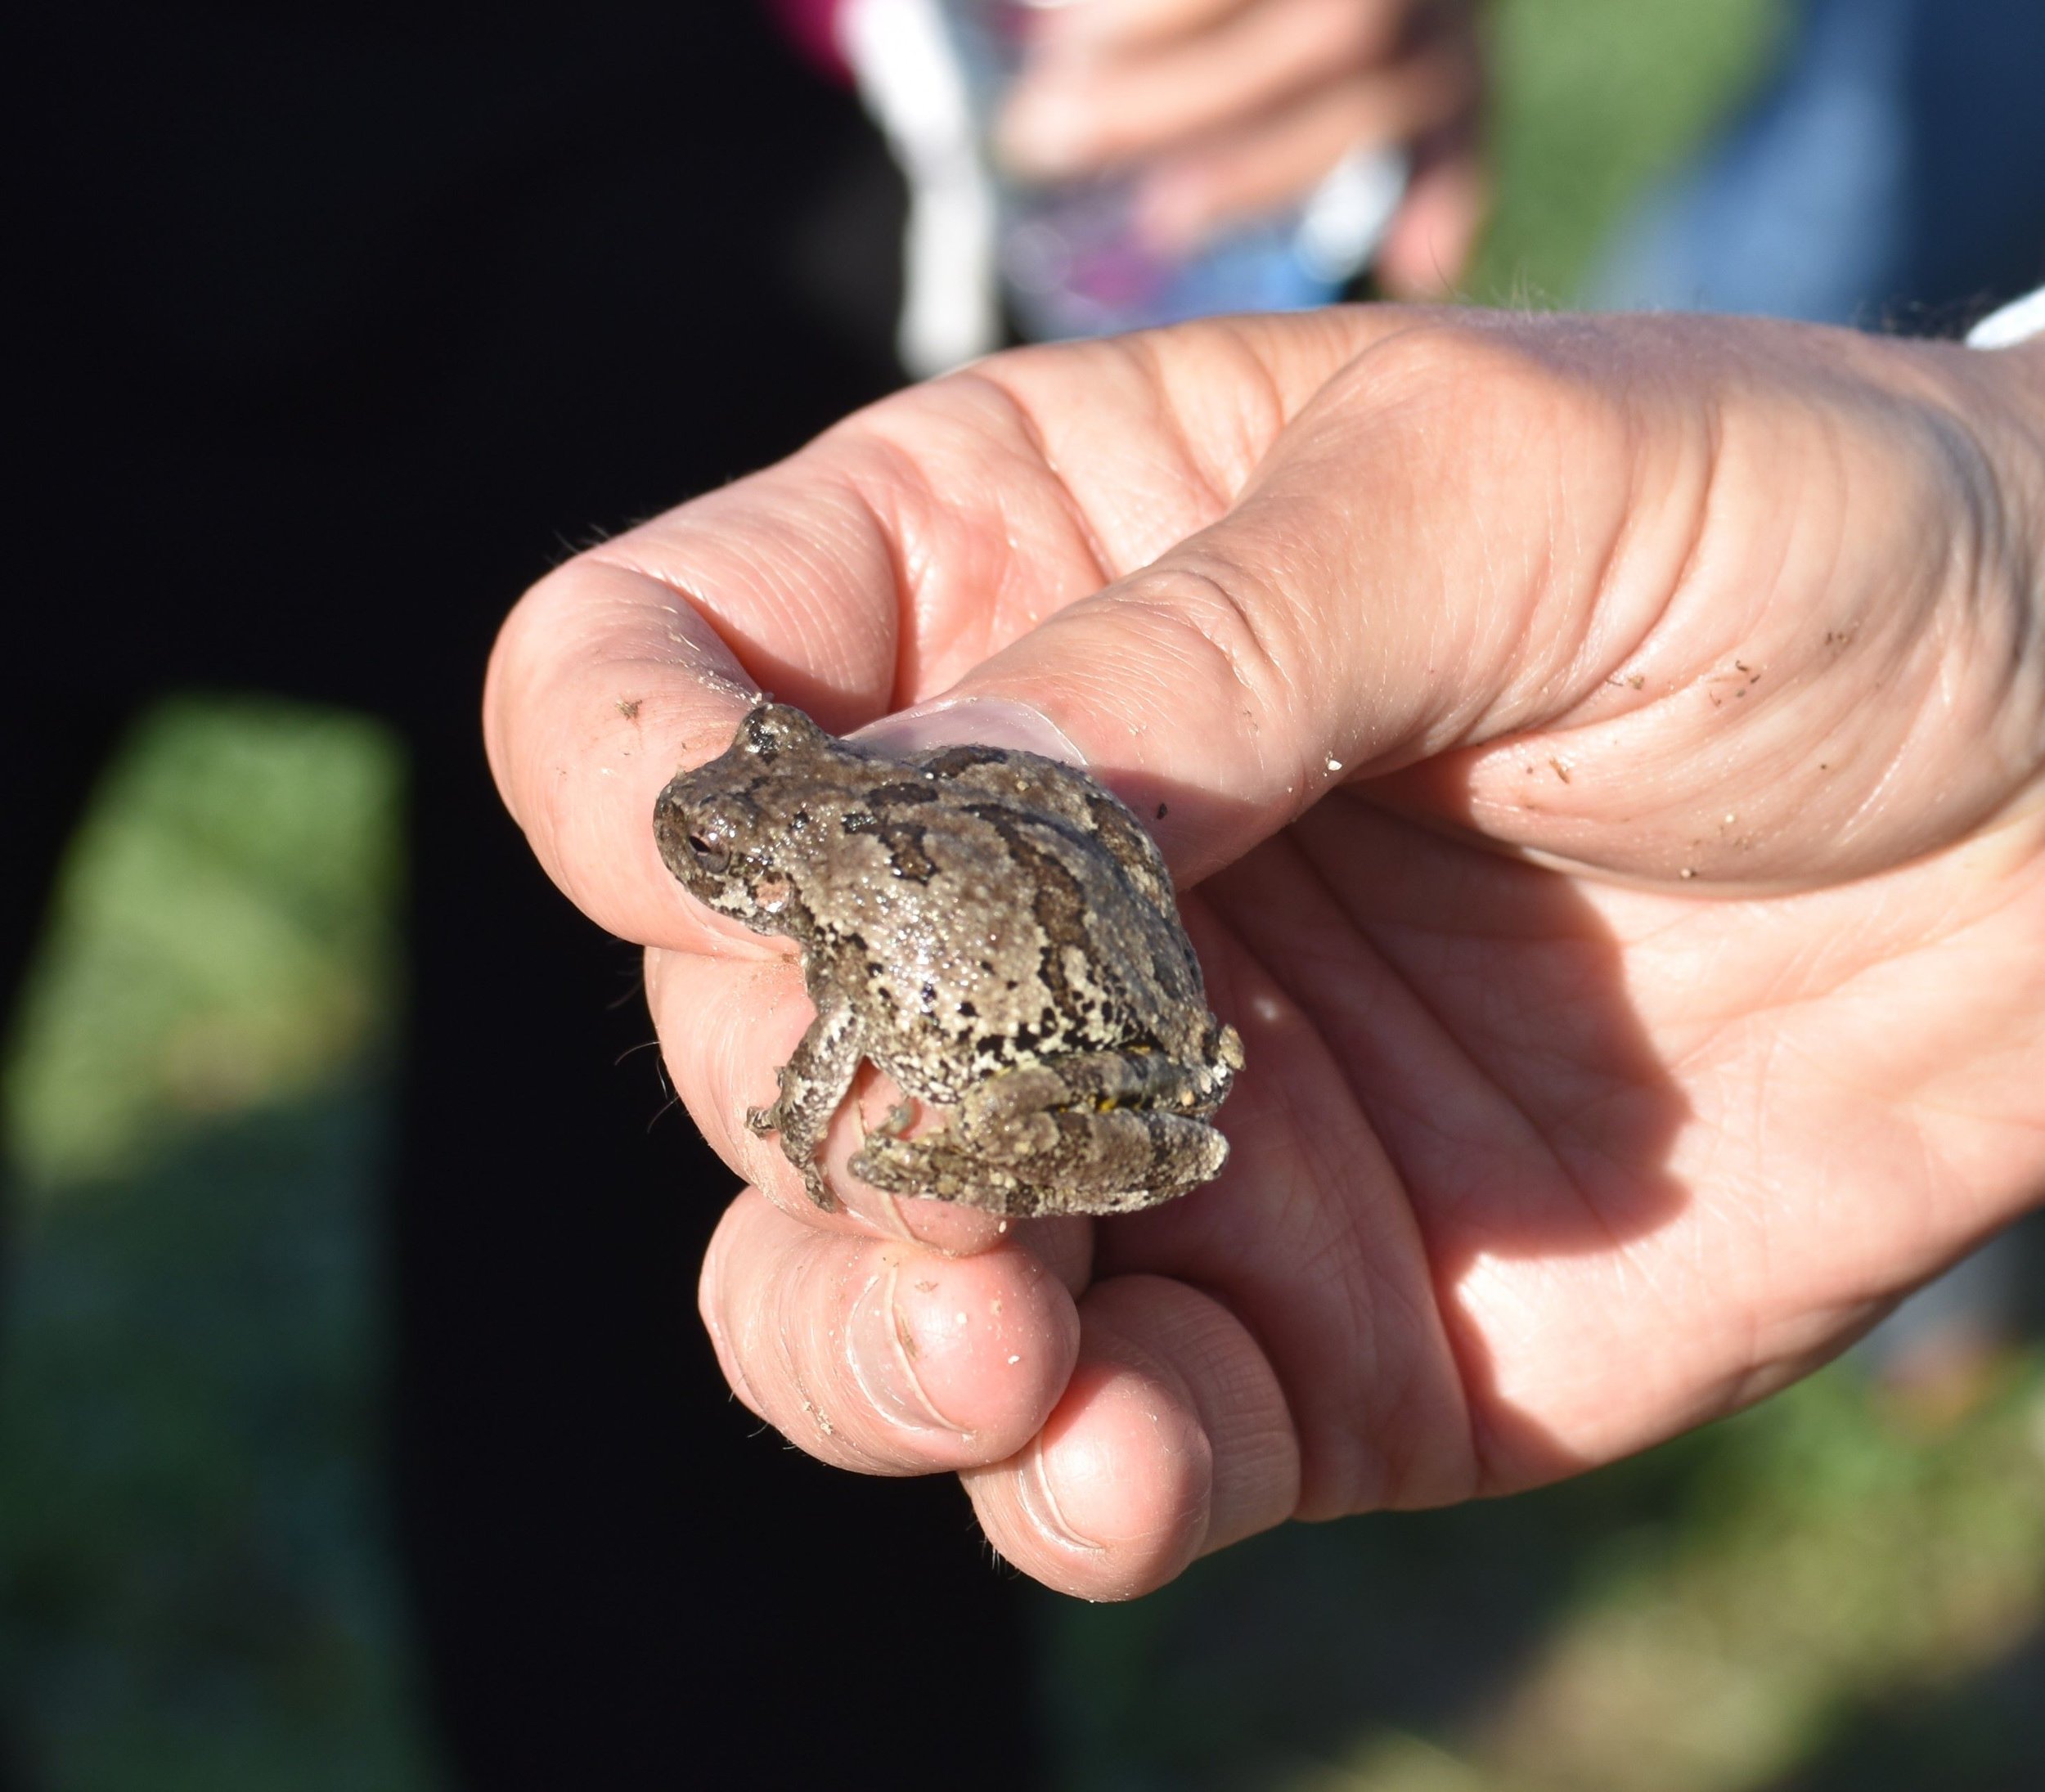 Toad - Little sioux resized.jpg